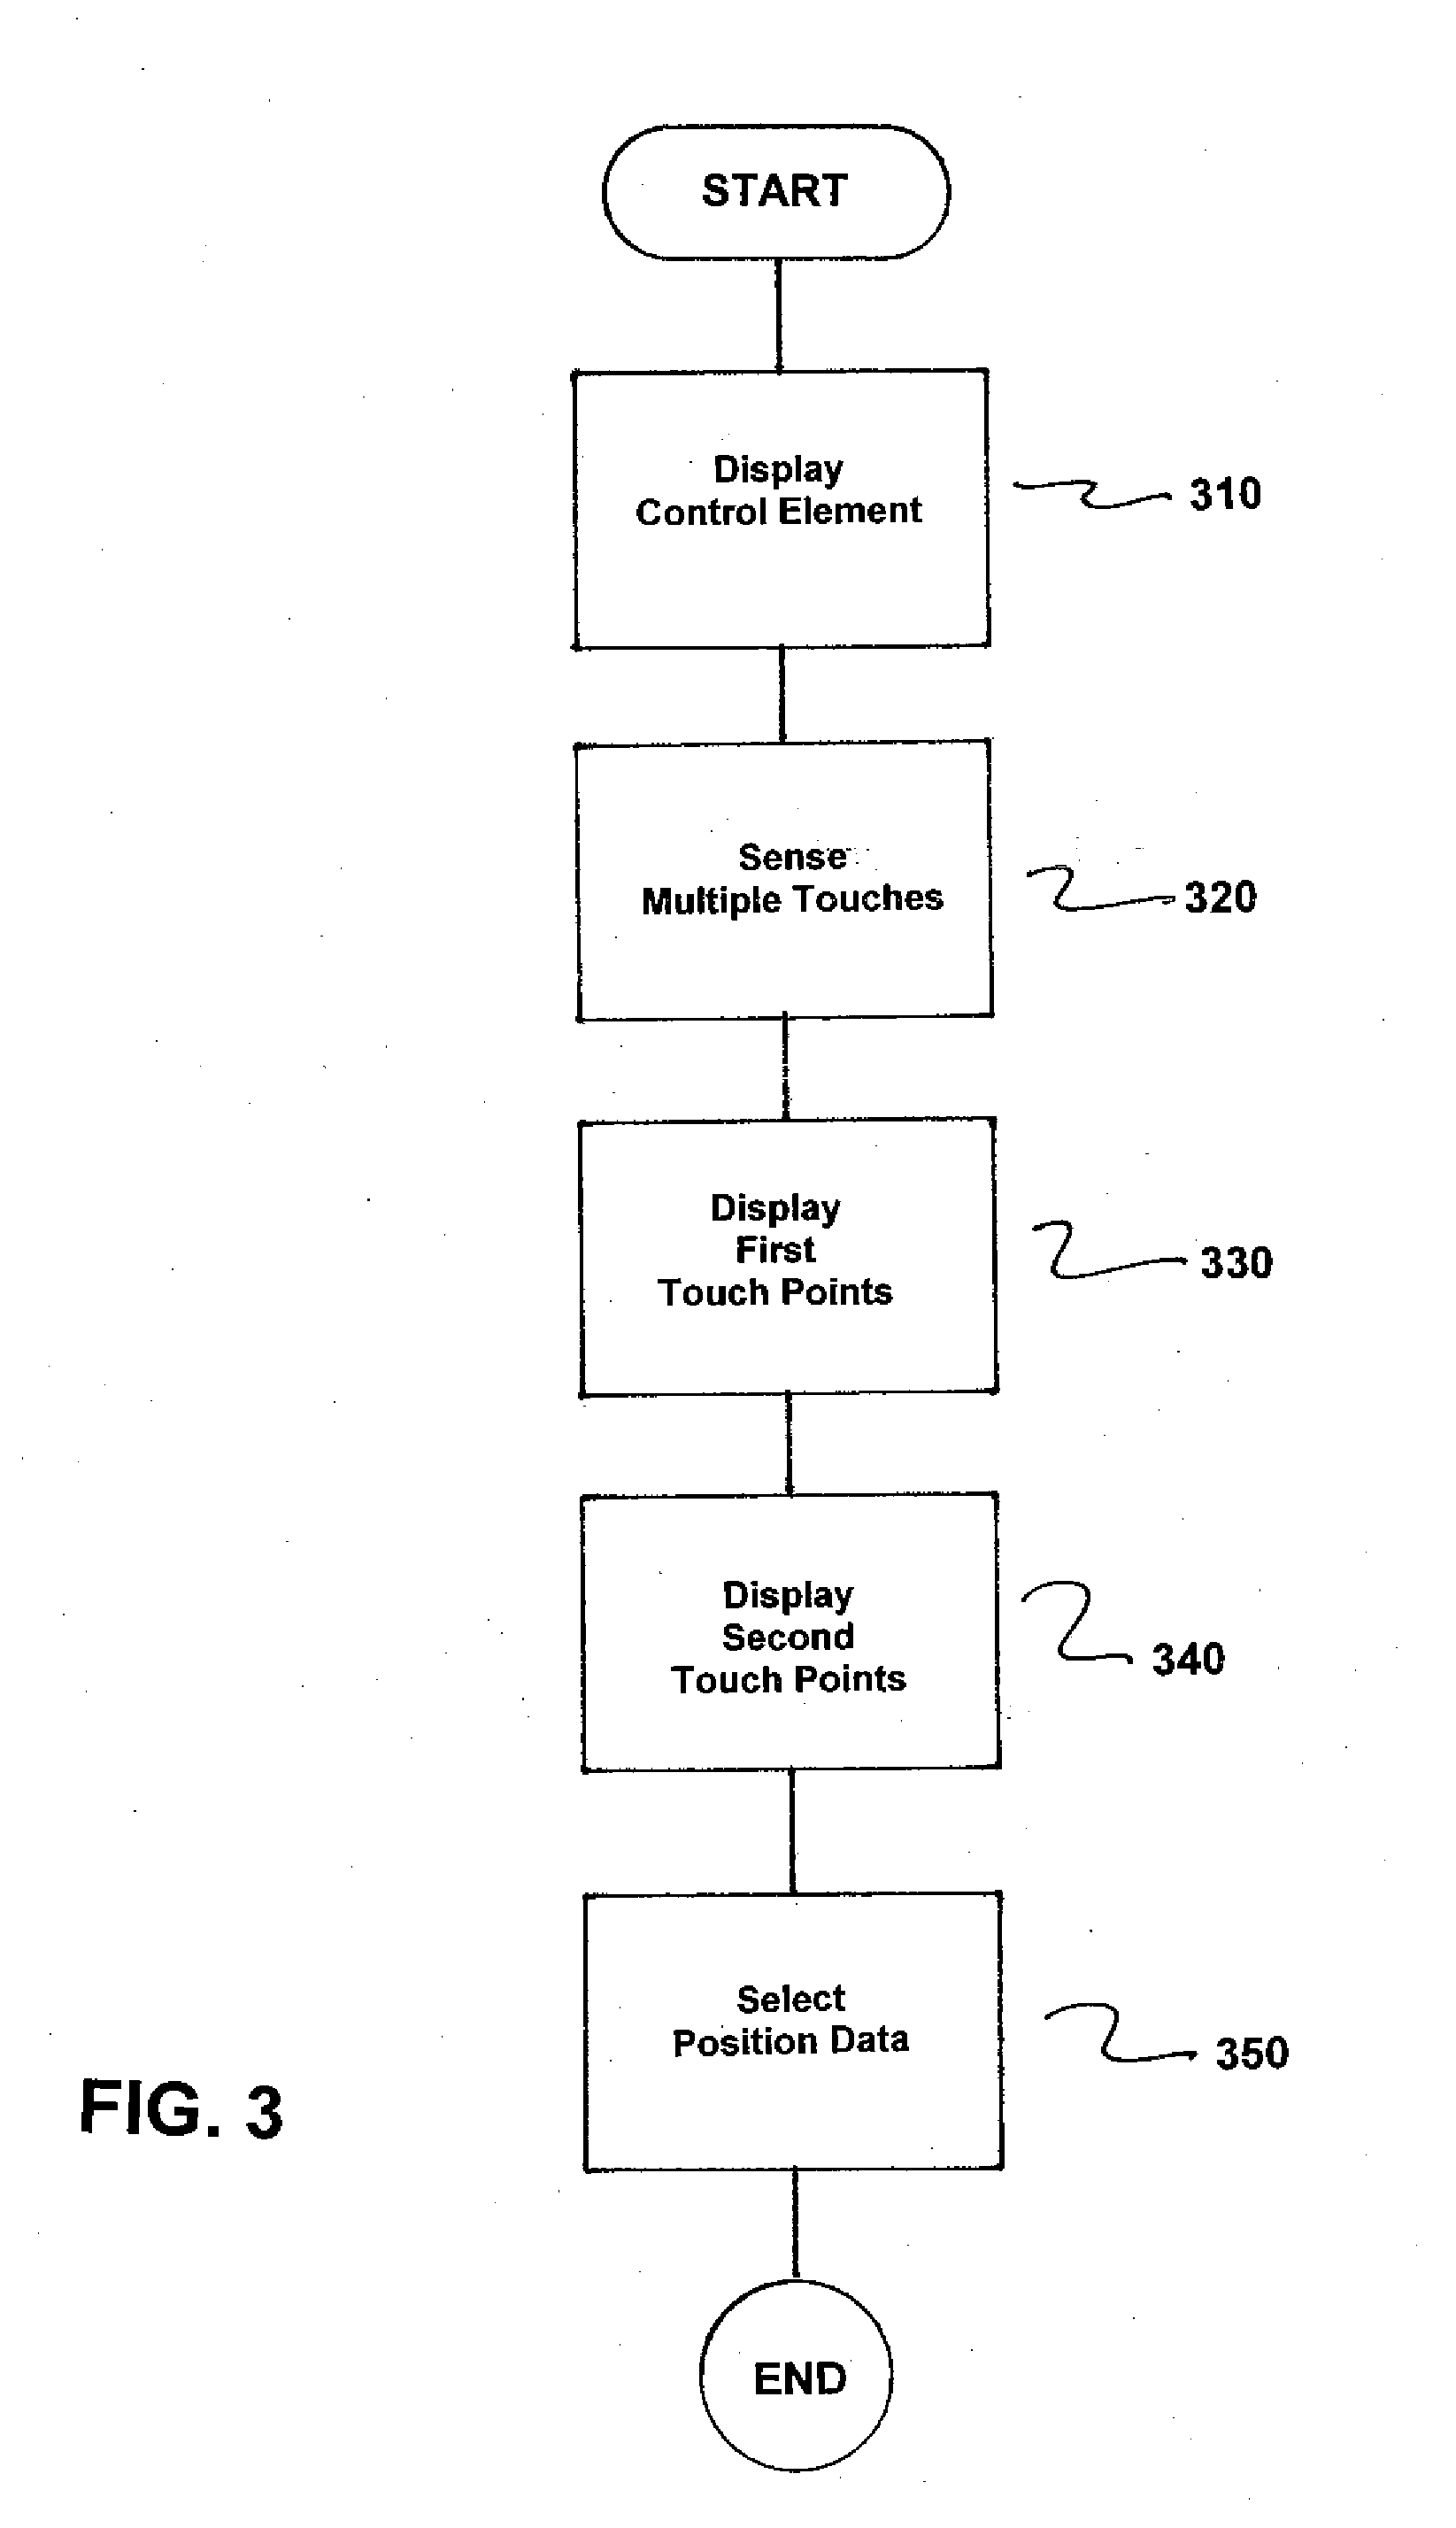 Method of Operating an Operator Control and Monitoring Device for Safety-Critical Applications